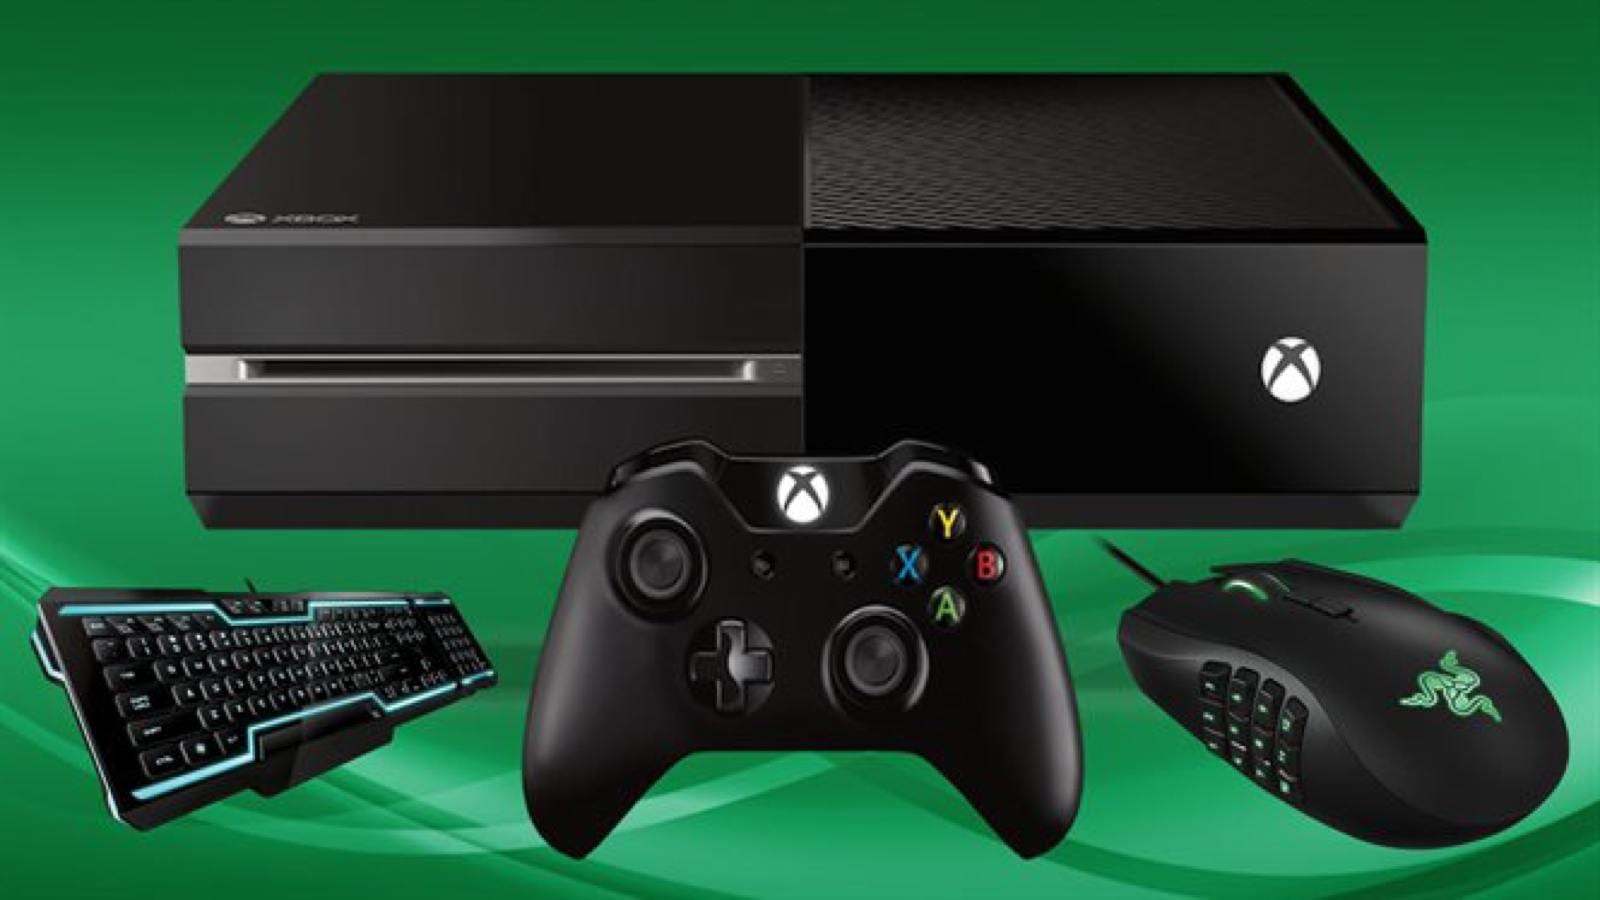 Keyboard and Mouse support for Xbox One